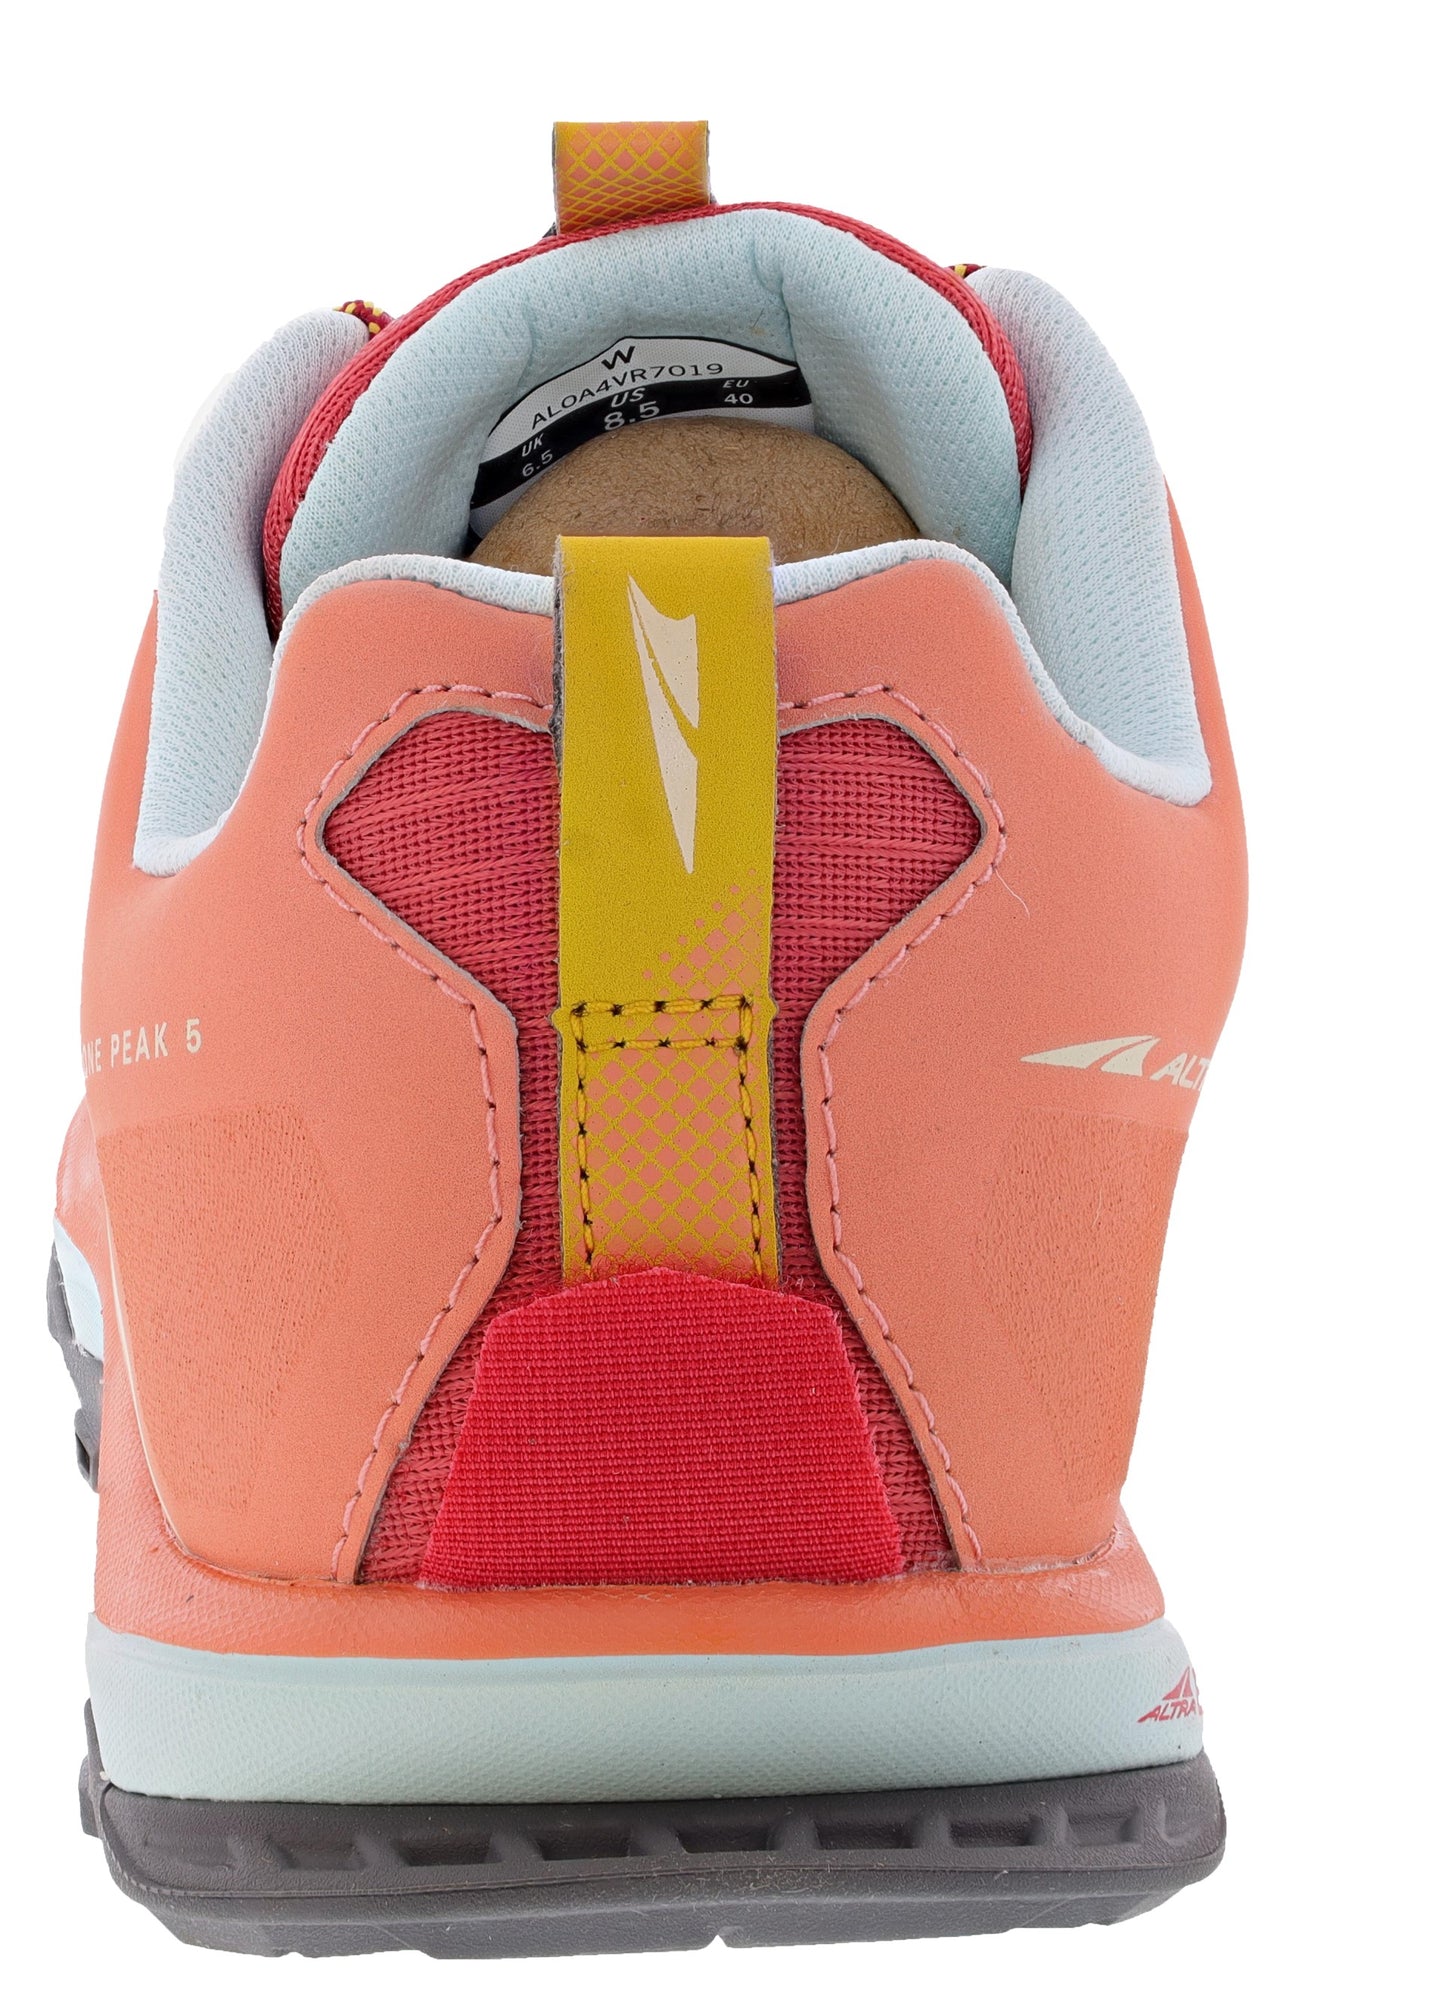 
                  
                    Back of  rose/coral Altra Lone Peak 5 All Weather Lightweight Trail Running Shoes Women's
                  
                